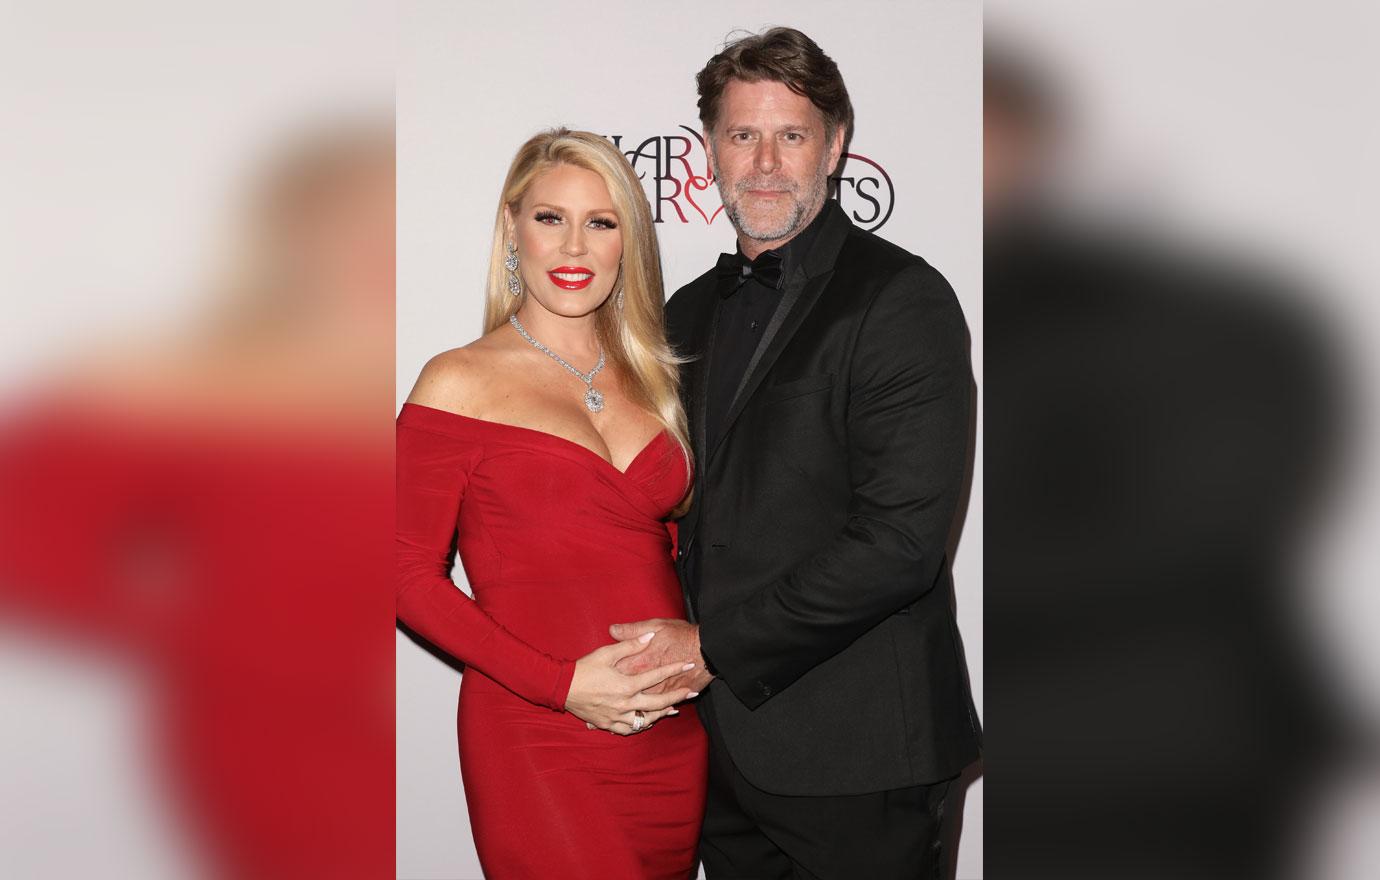 RHOC Very Pregnant Gretchen Rossi Shares Near-Naked Snap image image